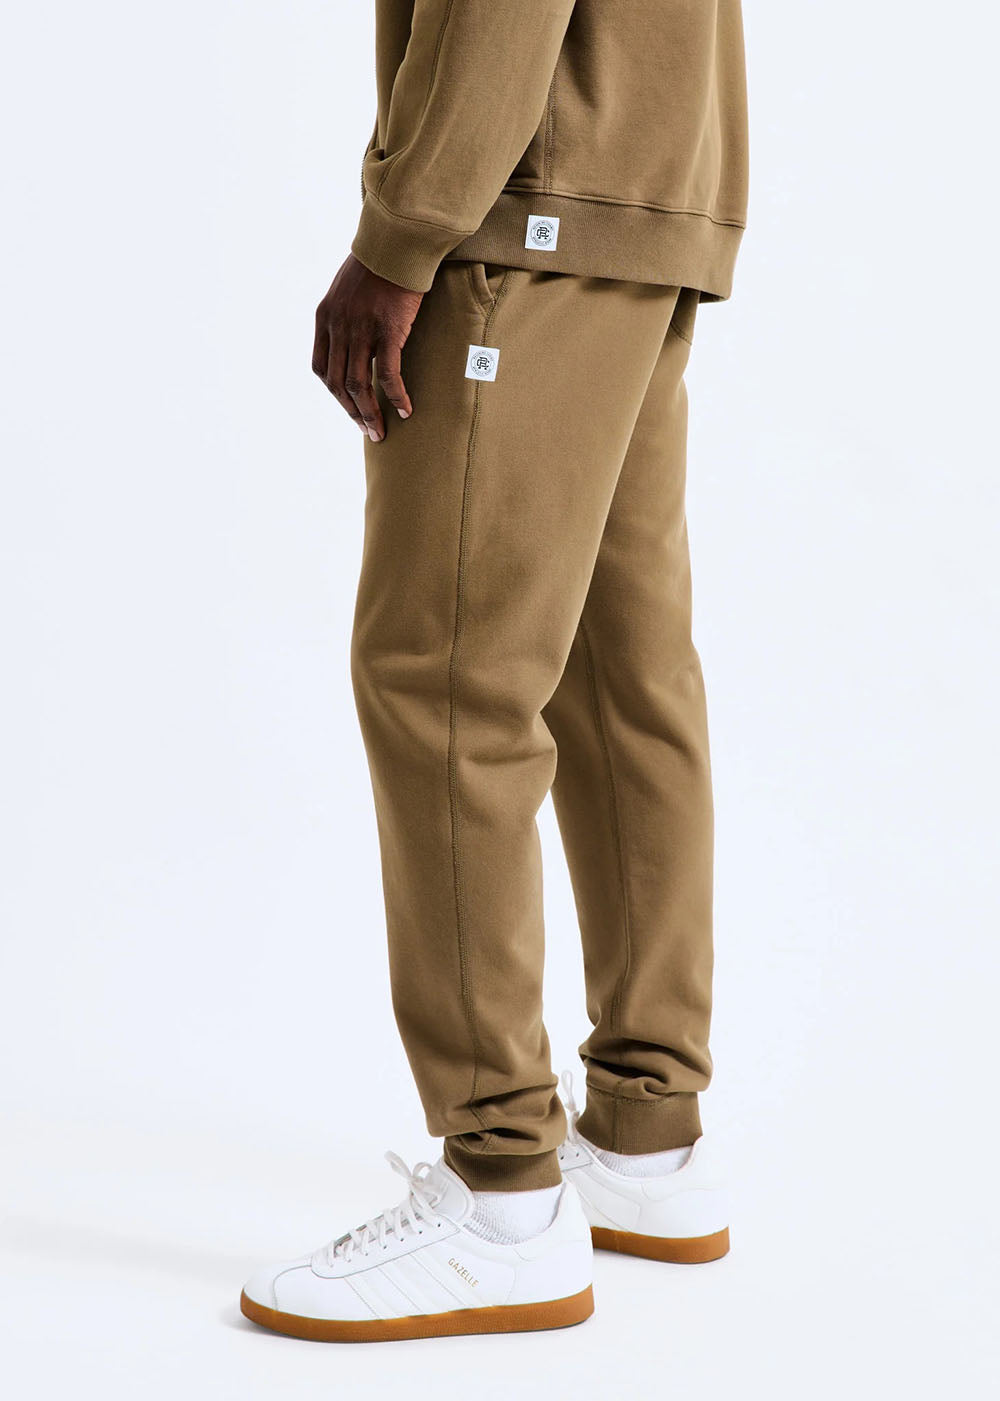 Midweight Terry Slim Sweatpant - Clay - Reigning Champ Canada - Danali - RC-5075